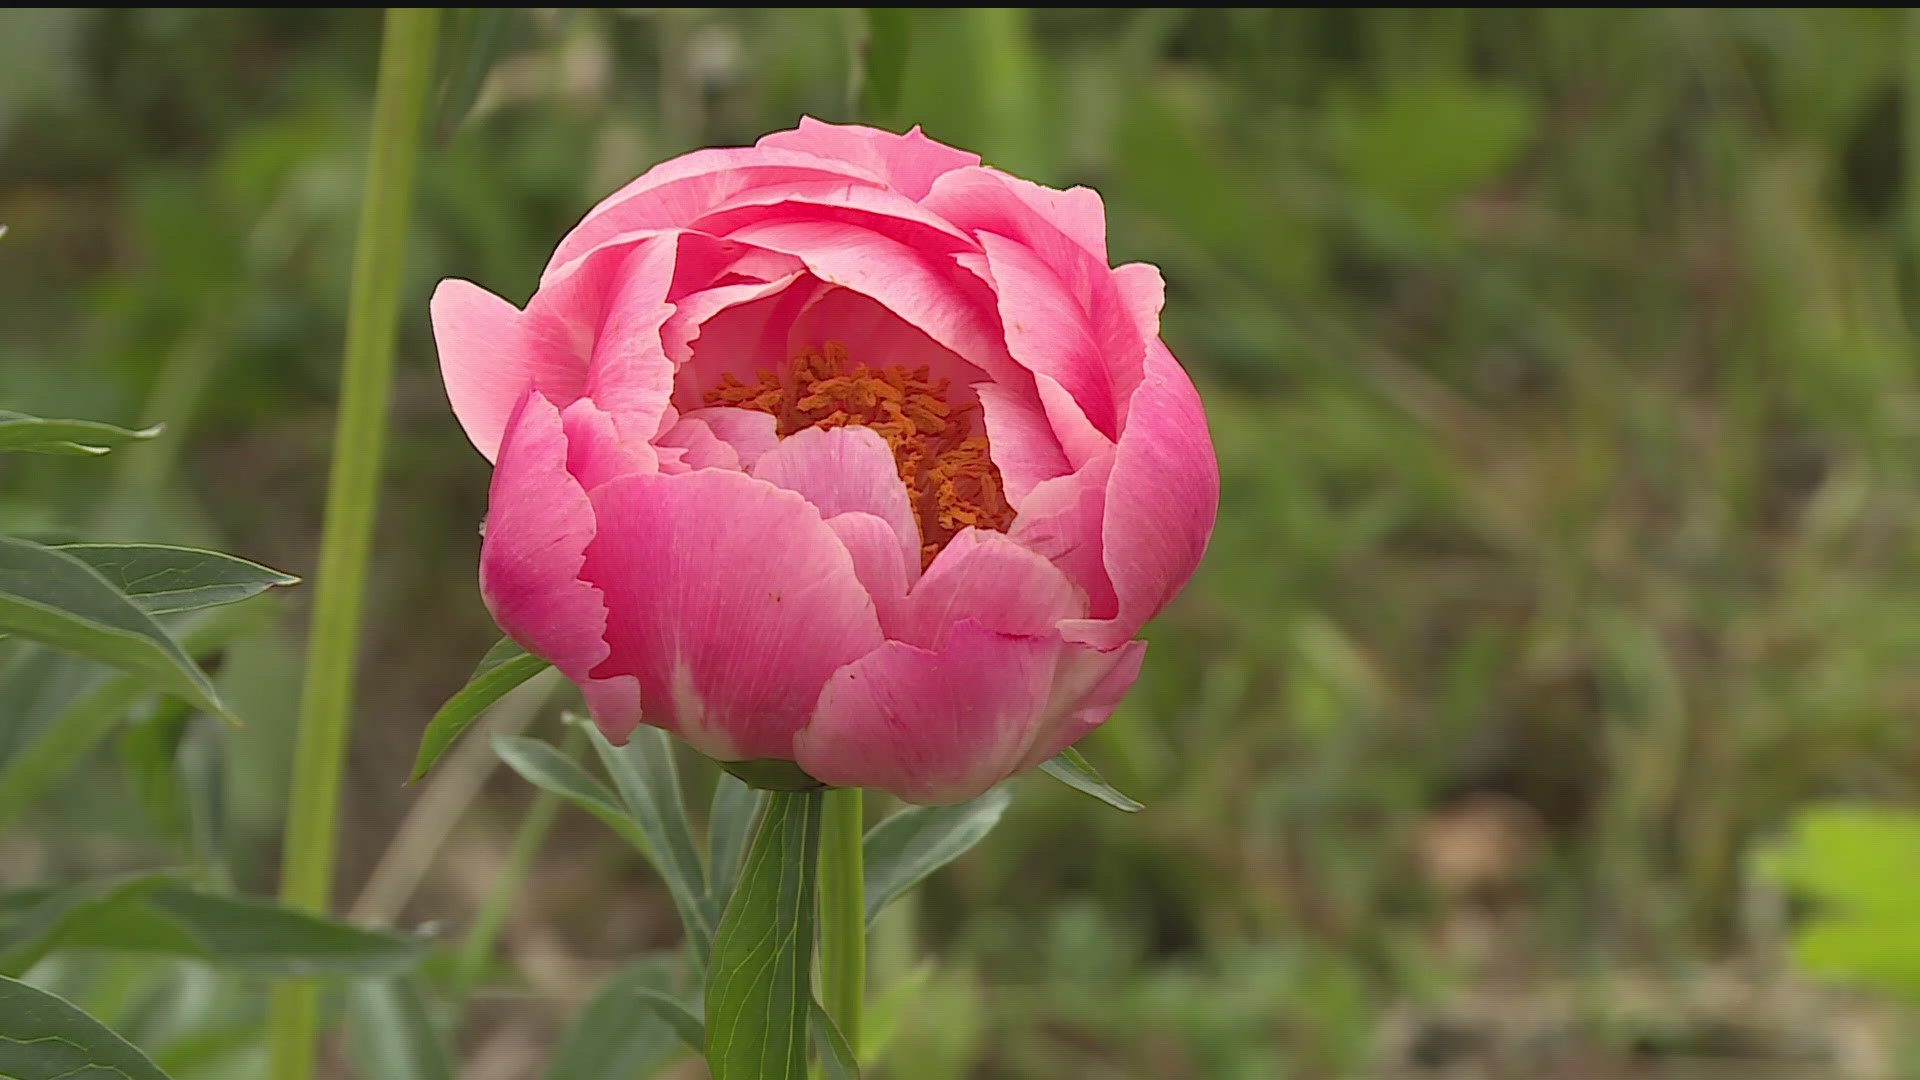 More than the classic doubles, peonies can take on many forms. You’ve been missing out of you haven’t explored all the different forms of peonies!